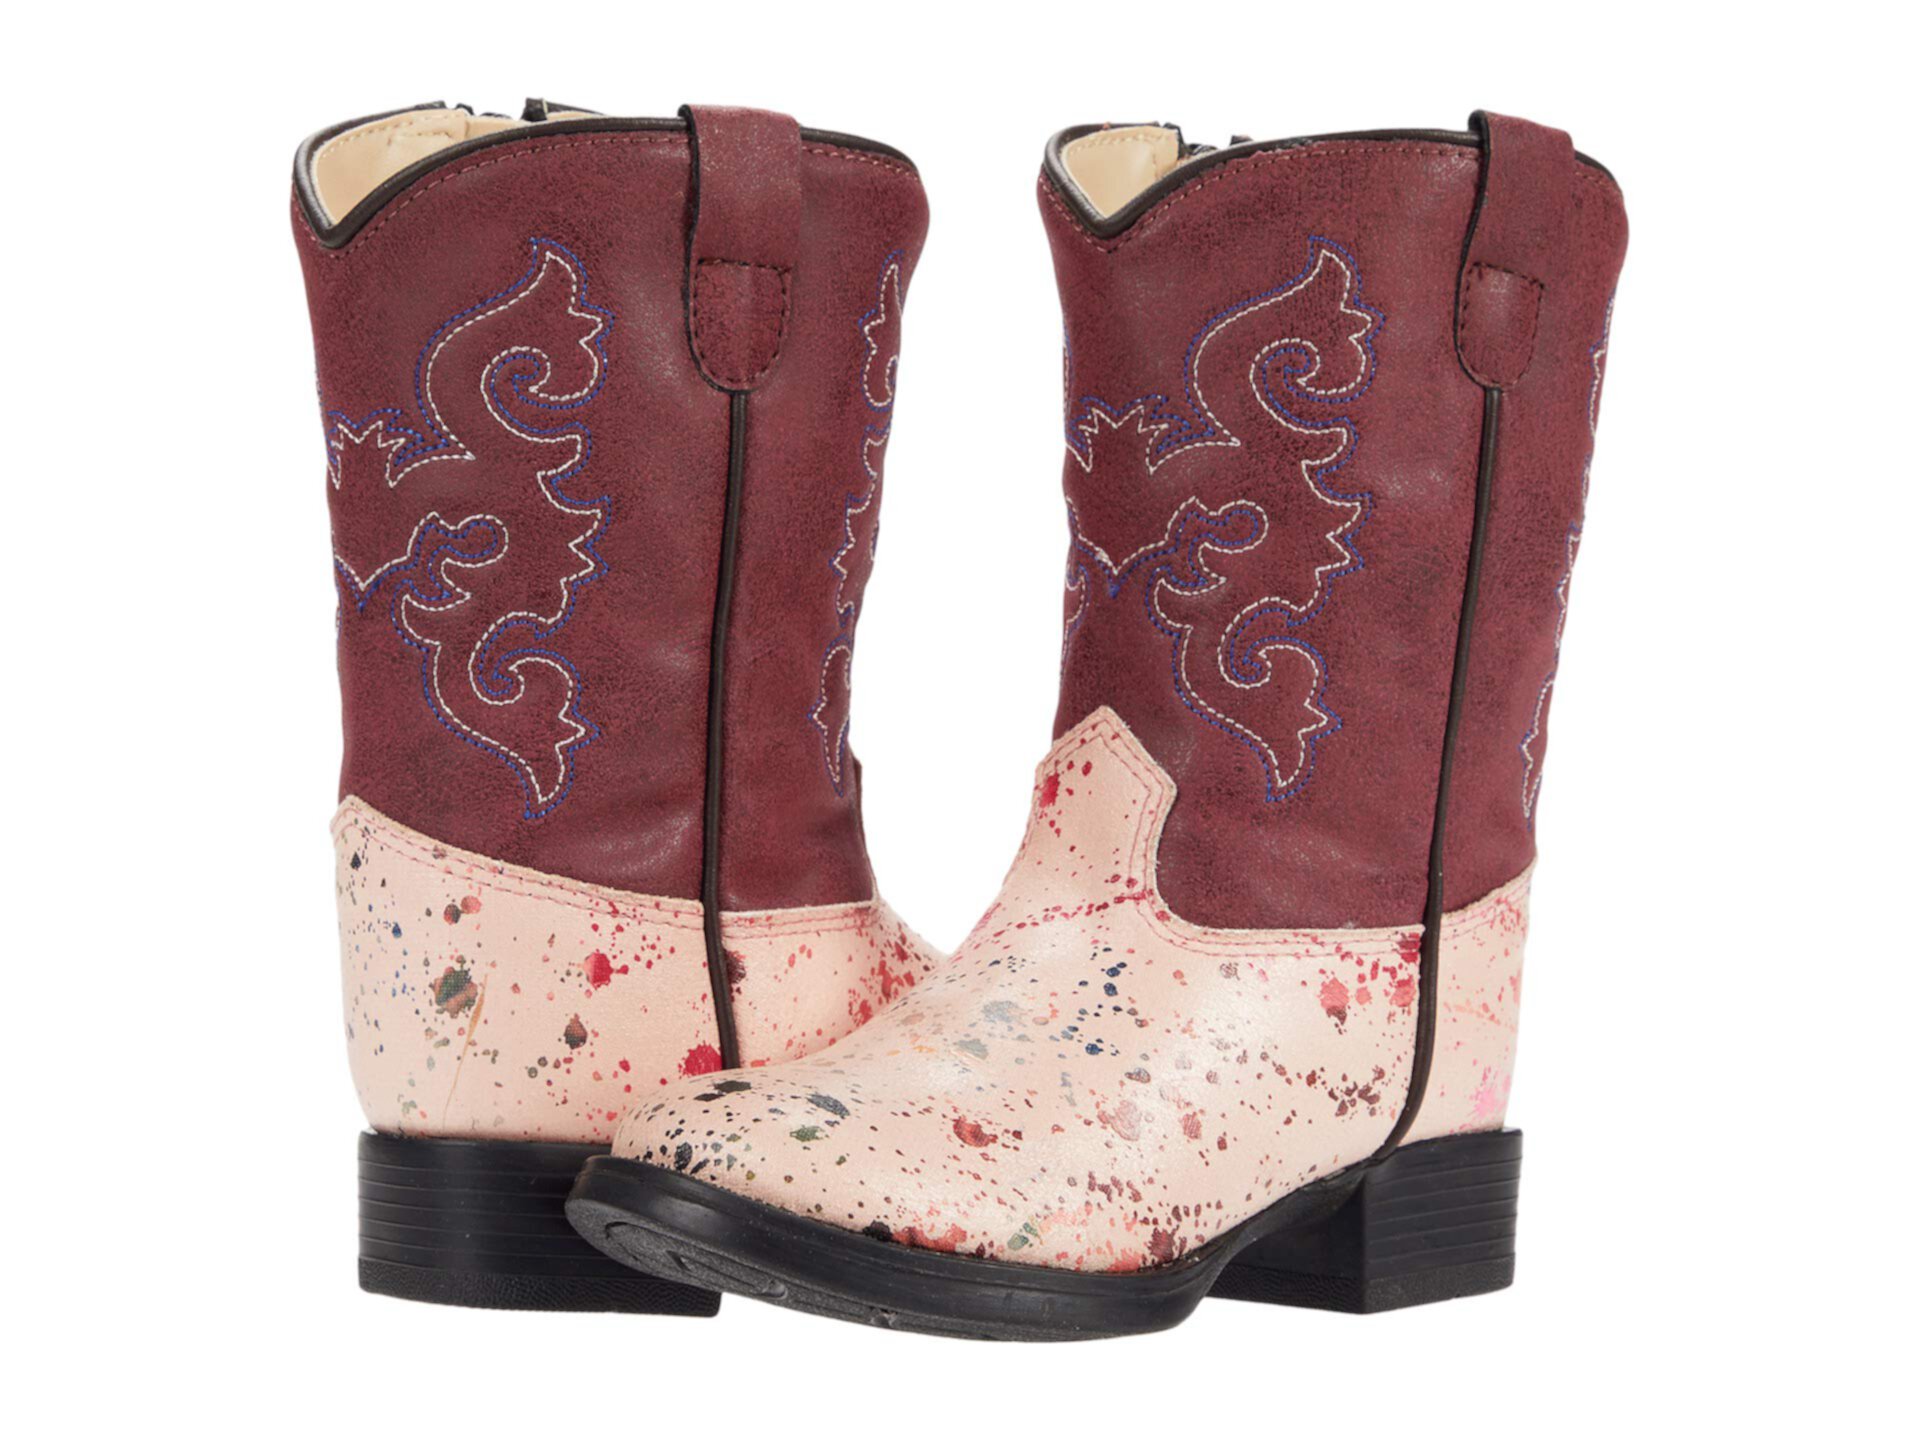 Pretty Jr. (малыш) Old West Kids Boots